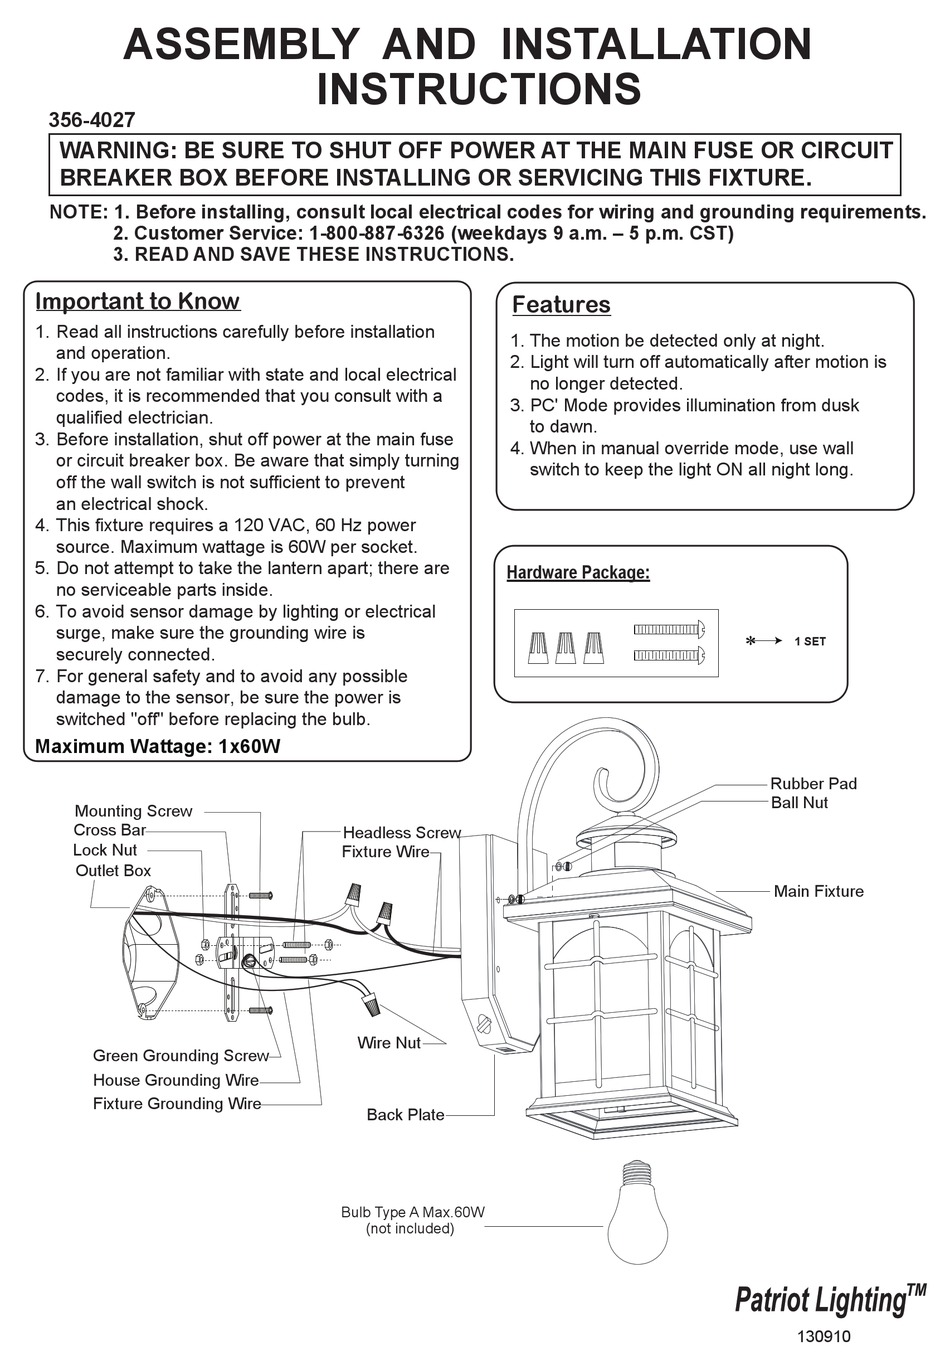 PATRIOT LIGHTING 130910 ASSEMBLY AND INSTALLATION INSTRUCTIONS Pdf Download  | ManualsLib  Patriot Lighting Wiring Diagram With Dimmer    ManualsLib